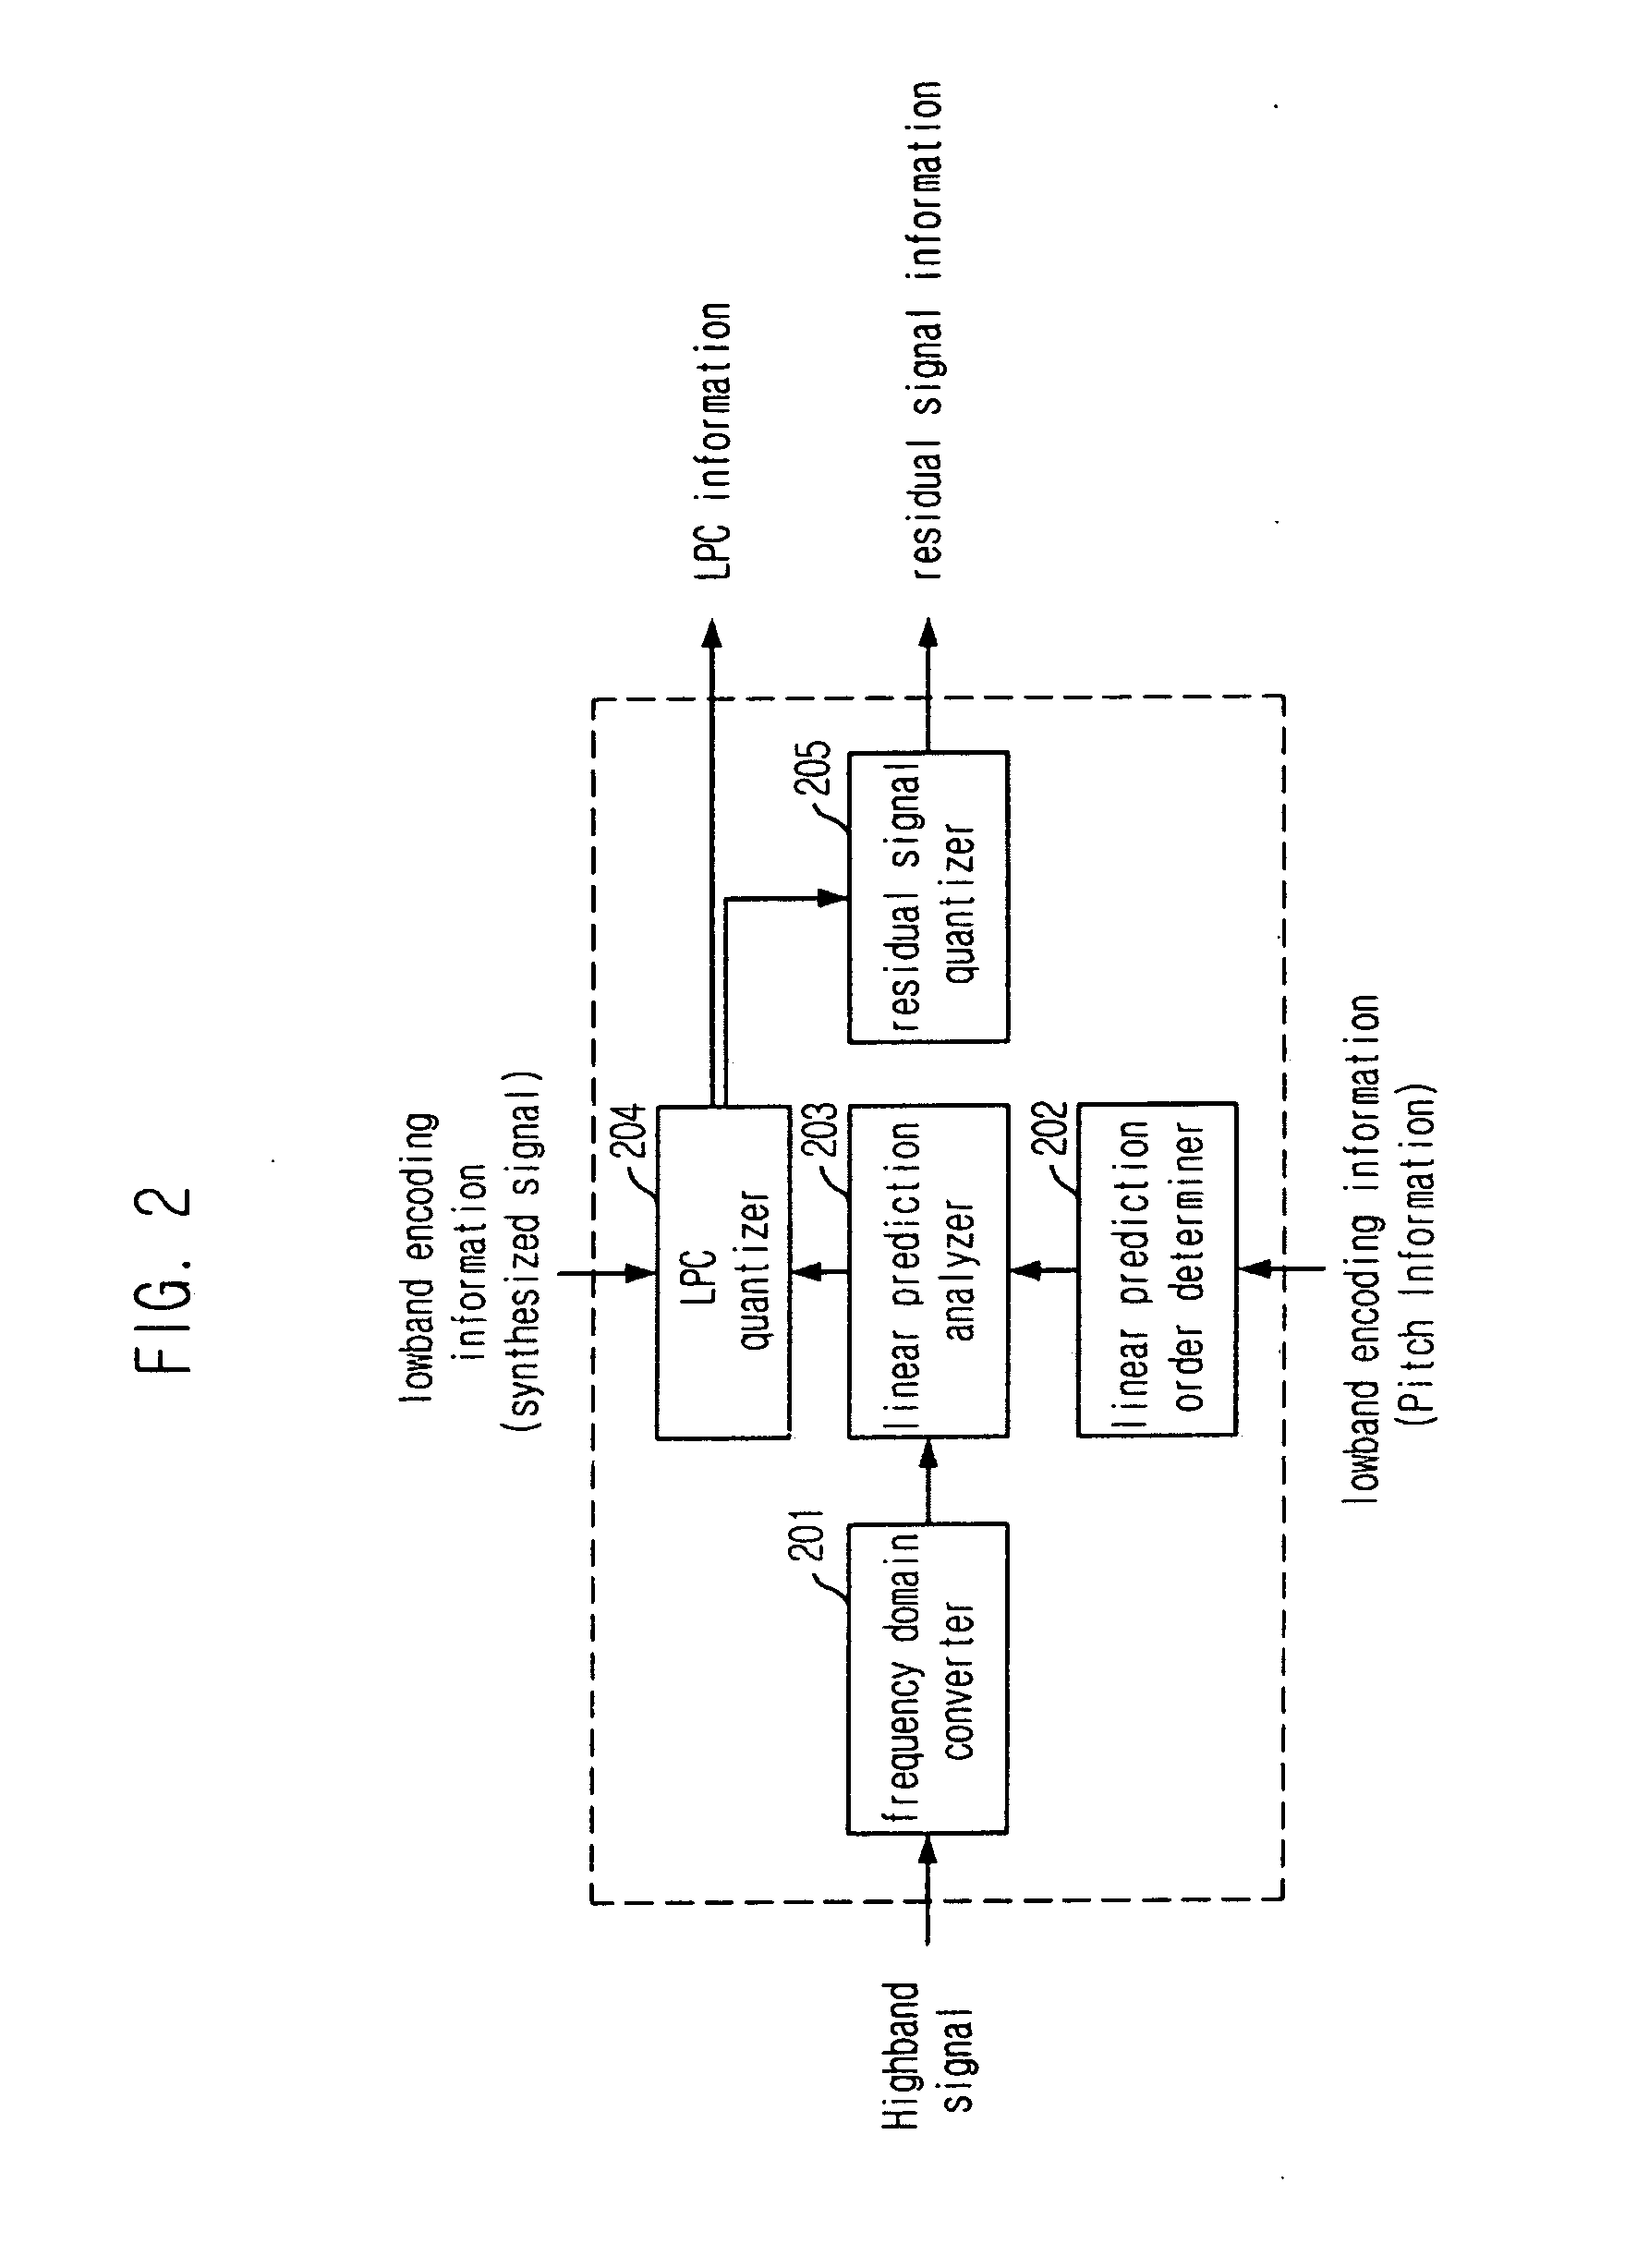 Highband speech coding apparatus and method for wideband speech coding system